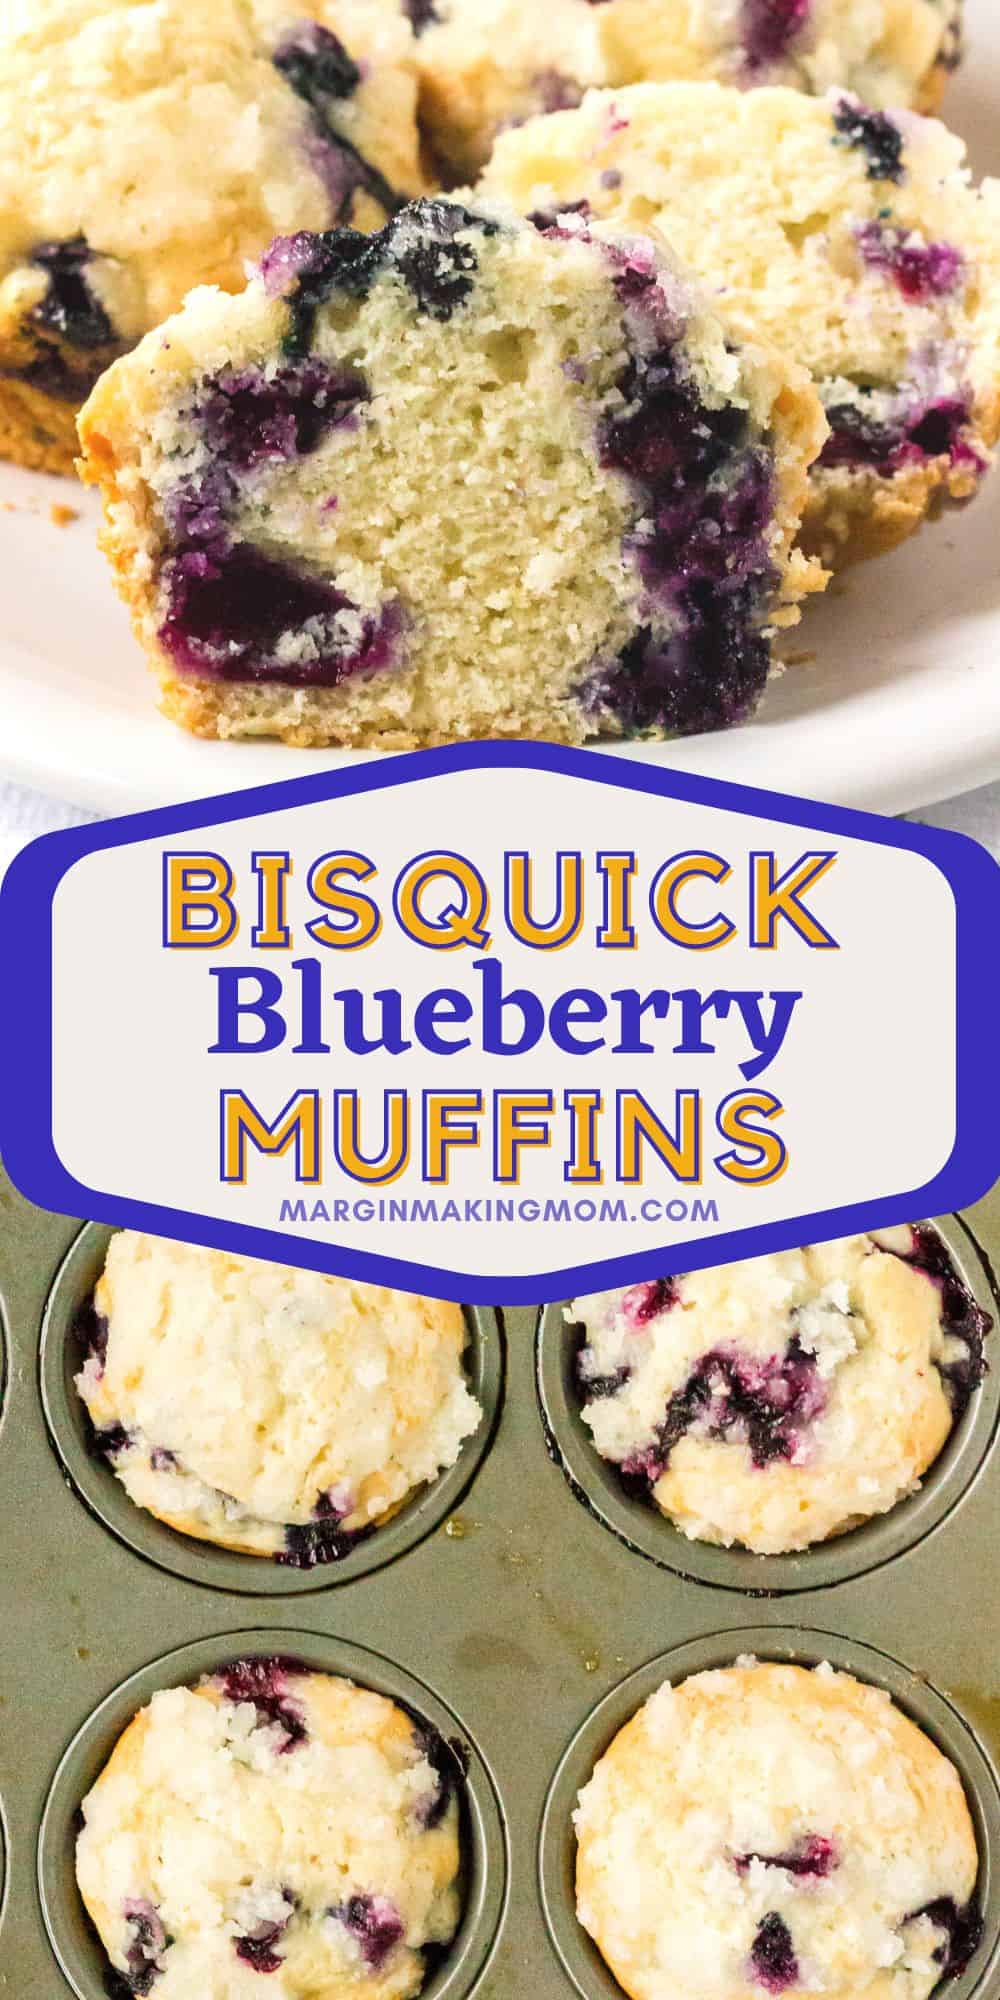 two photos; one shows Bisquick blueberry muffins on a plate, with a close-up view of a muffin that's cut in half. The other shows muffins in a baking tin.